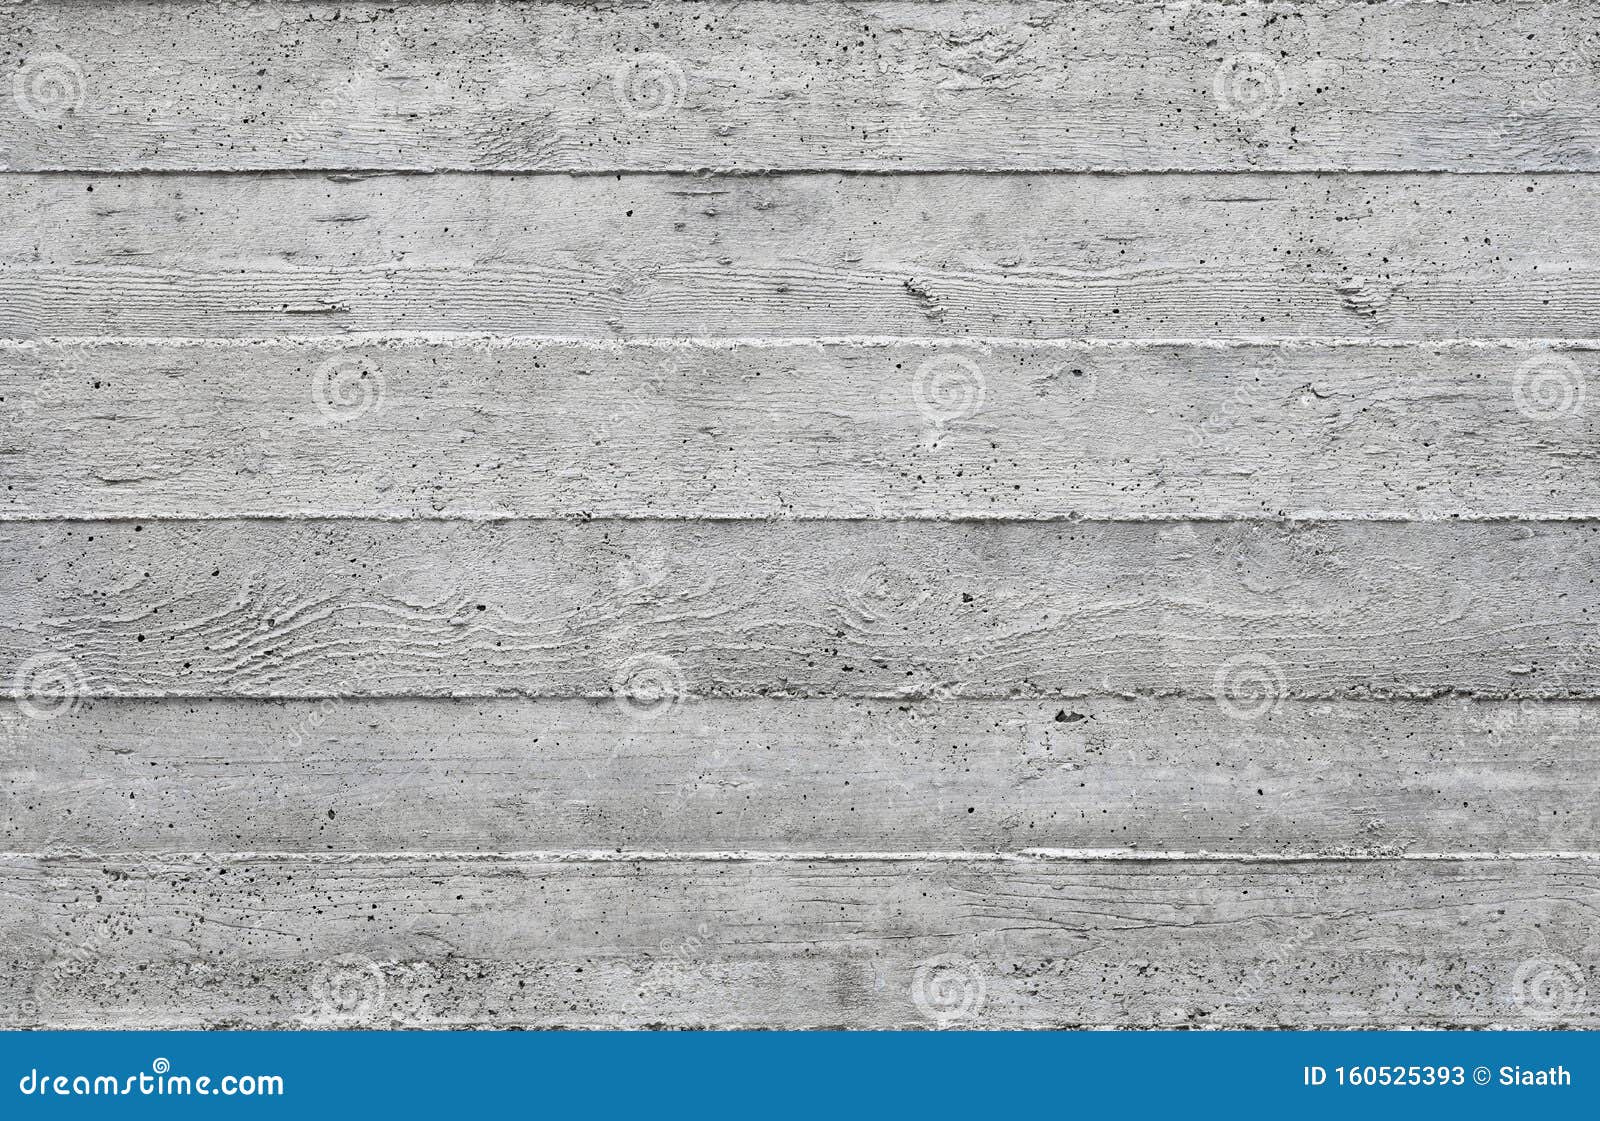 board formed concrete seamless texture